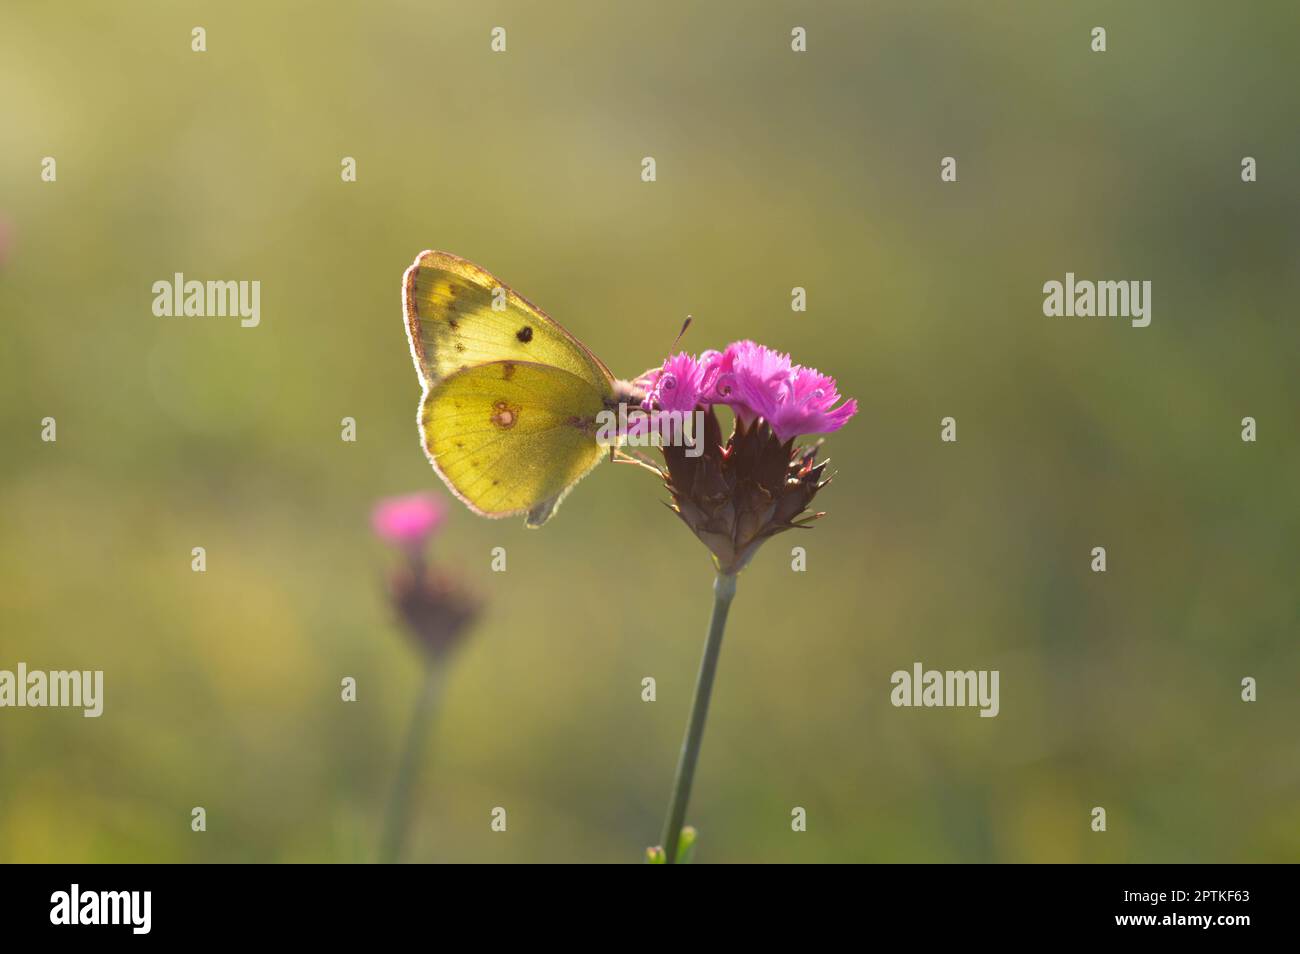 Clouded yellows, yellow butterfly on a flower in nature macro. Green natural background. Side view, closed wings. Stock Photo